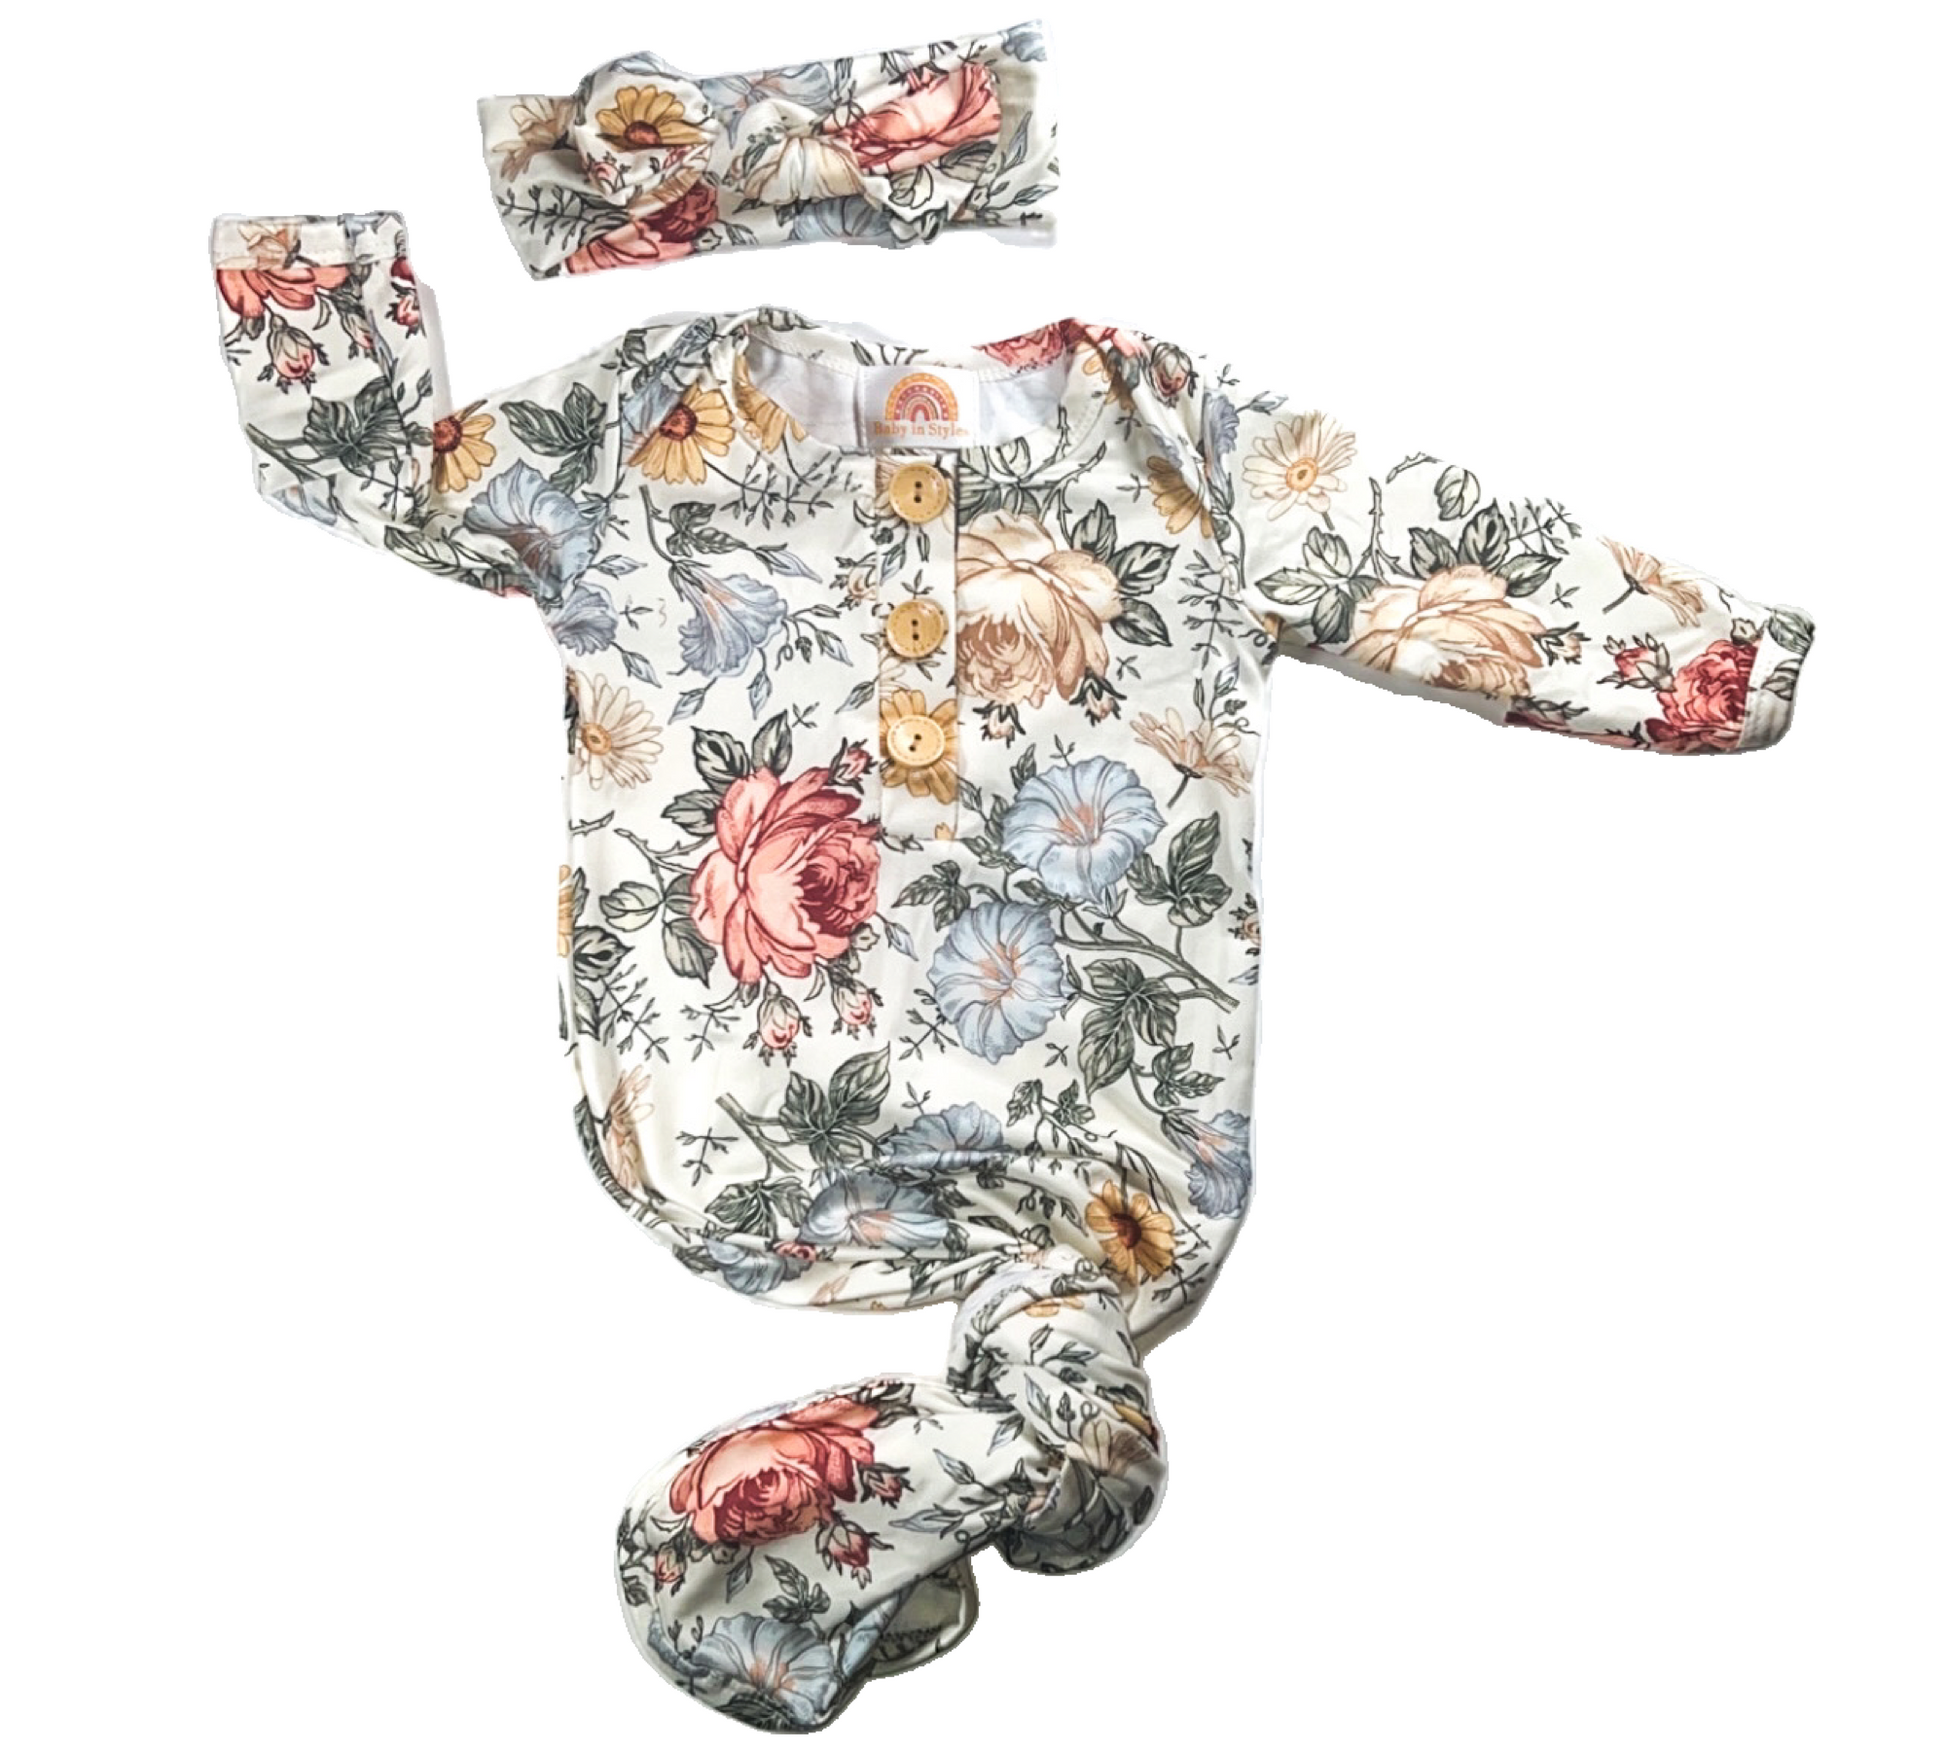 Vintage flowers newborn gown and headband set Baby in Styles